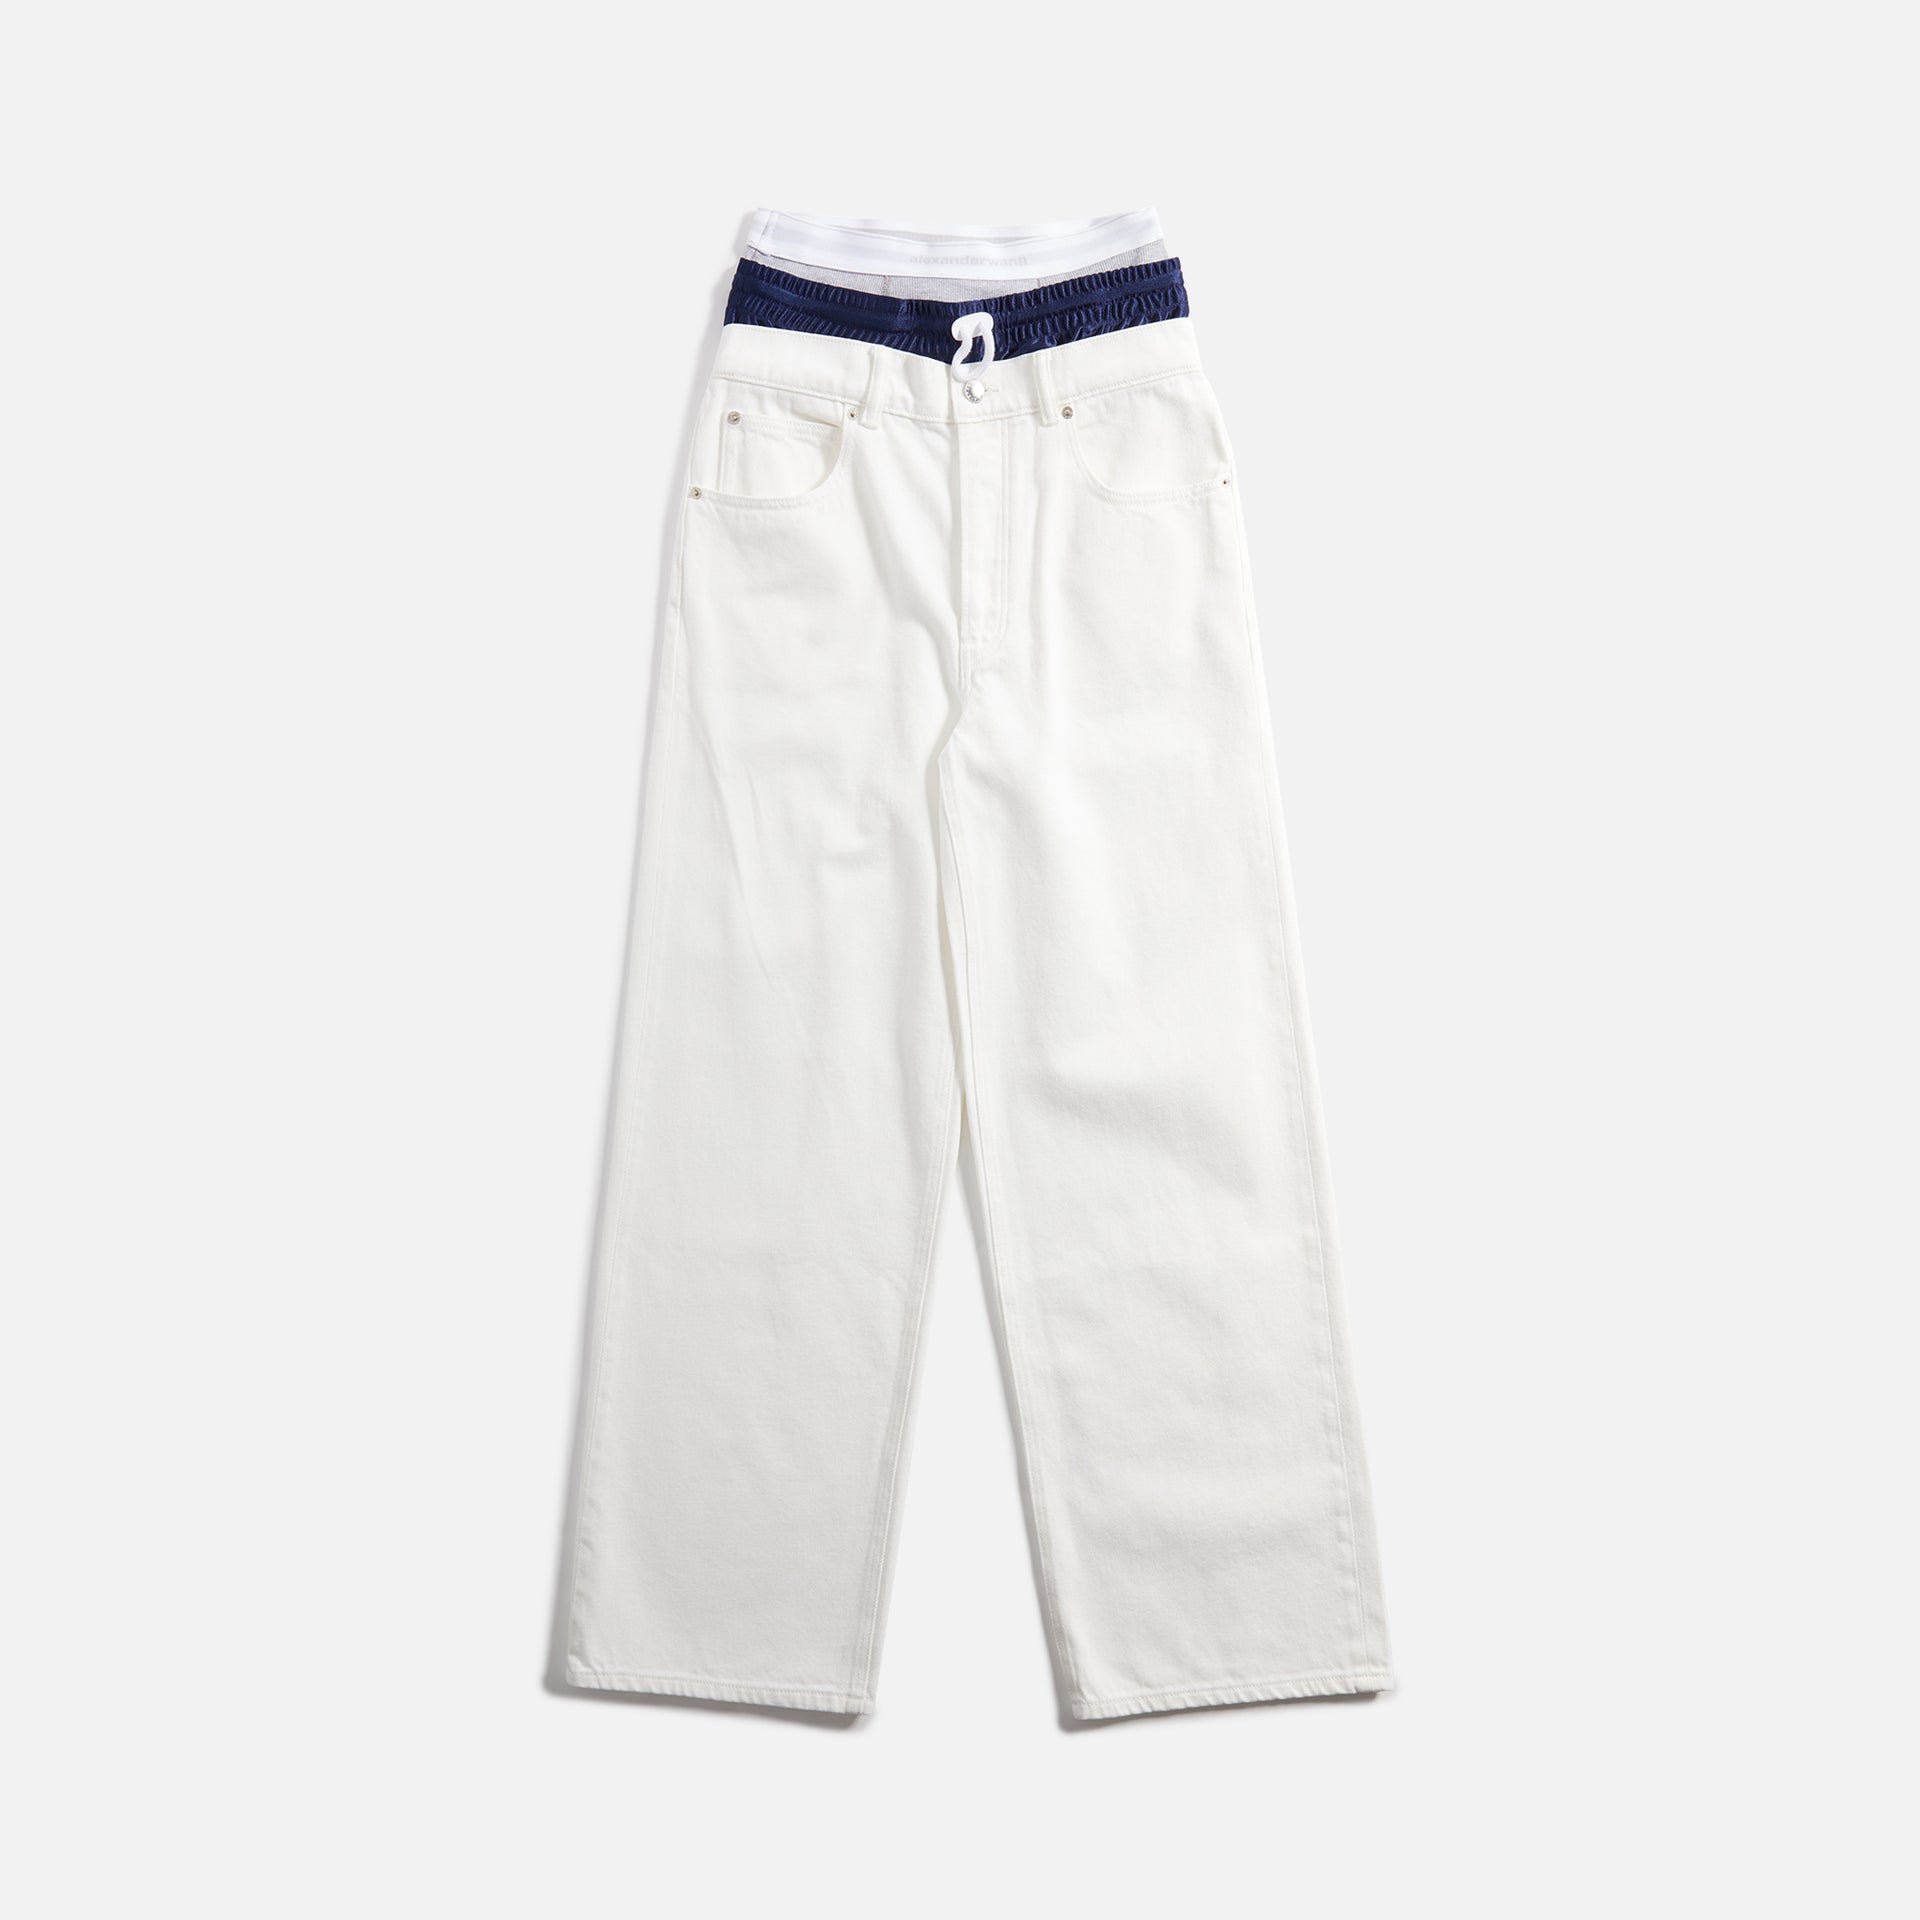 T by Alexander Wang Pre-Styled Tri-Layer 5 Pocket grey Jean - White